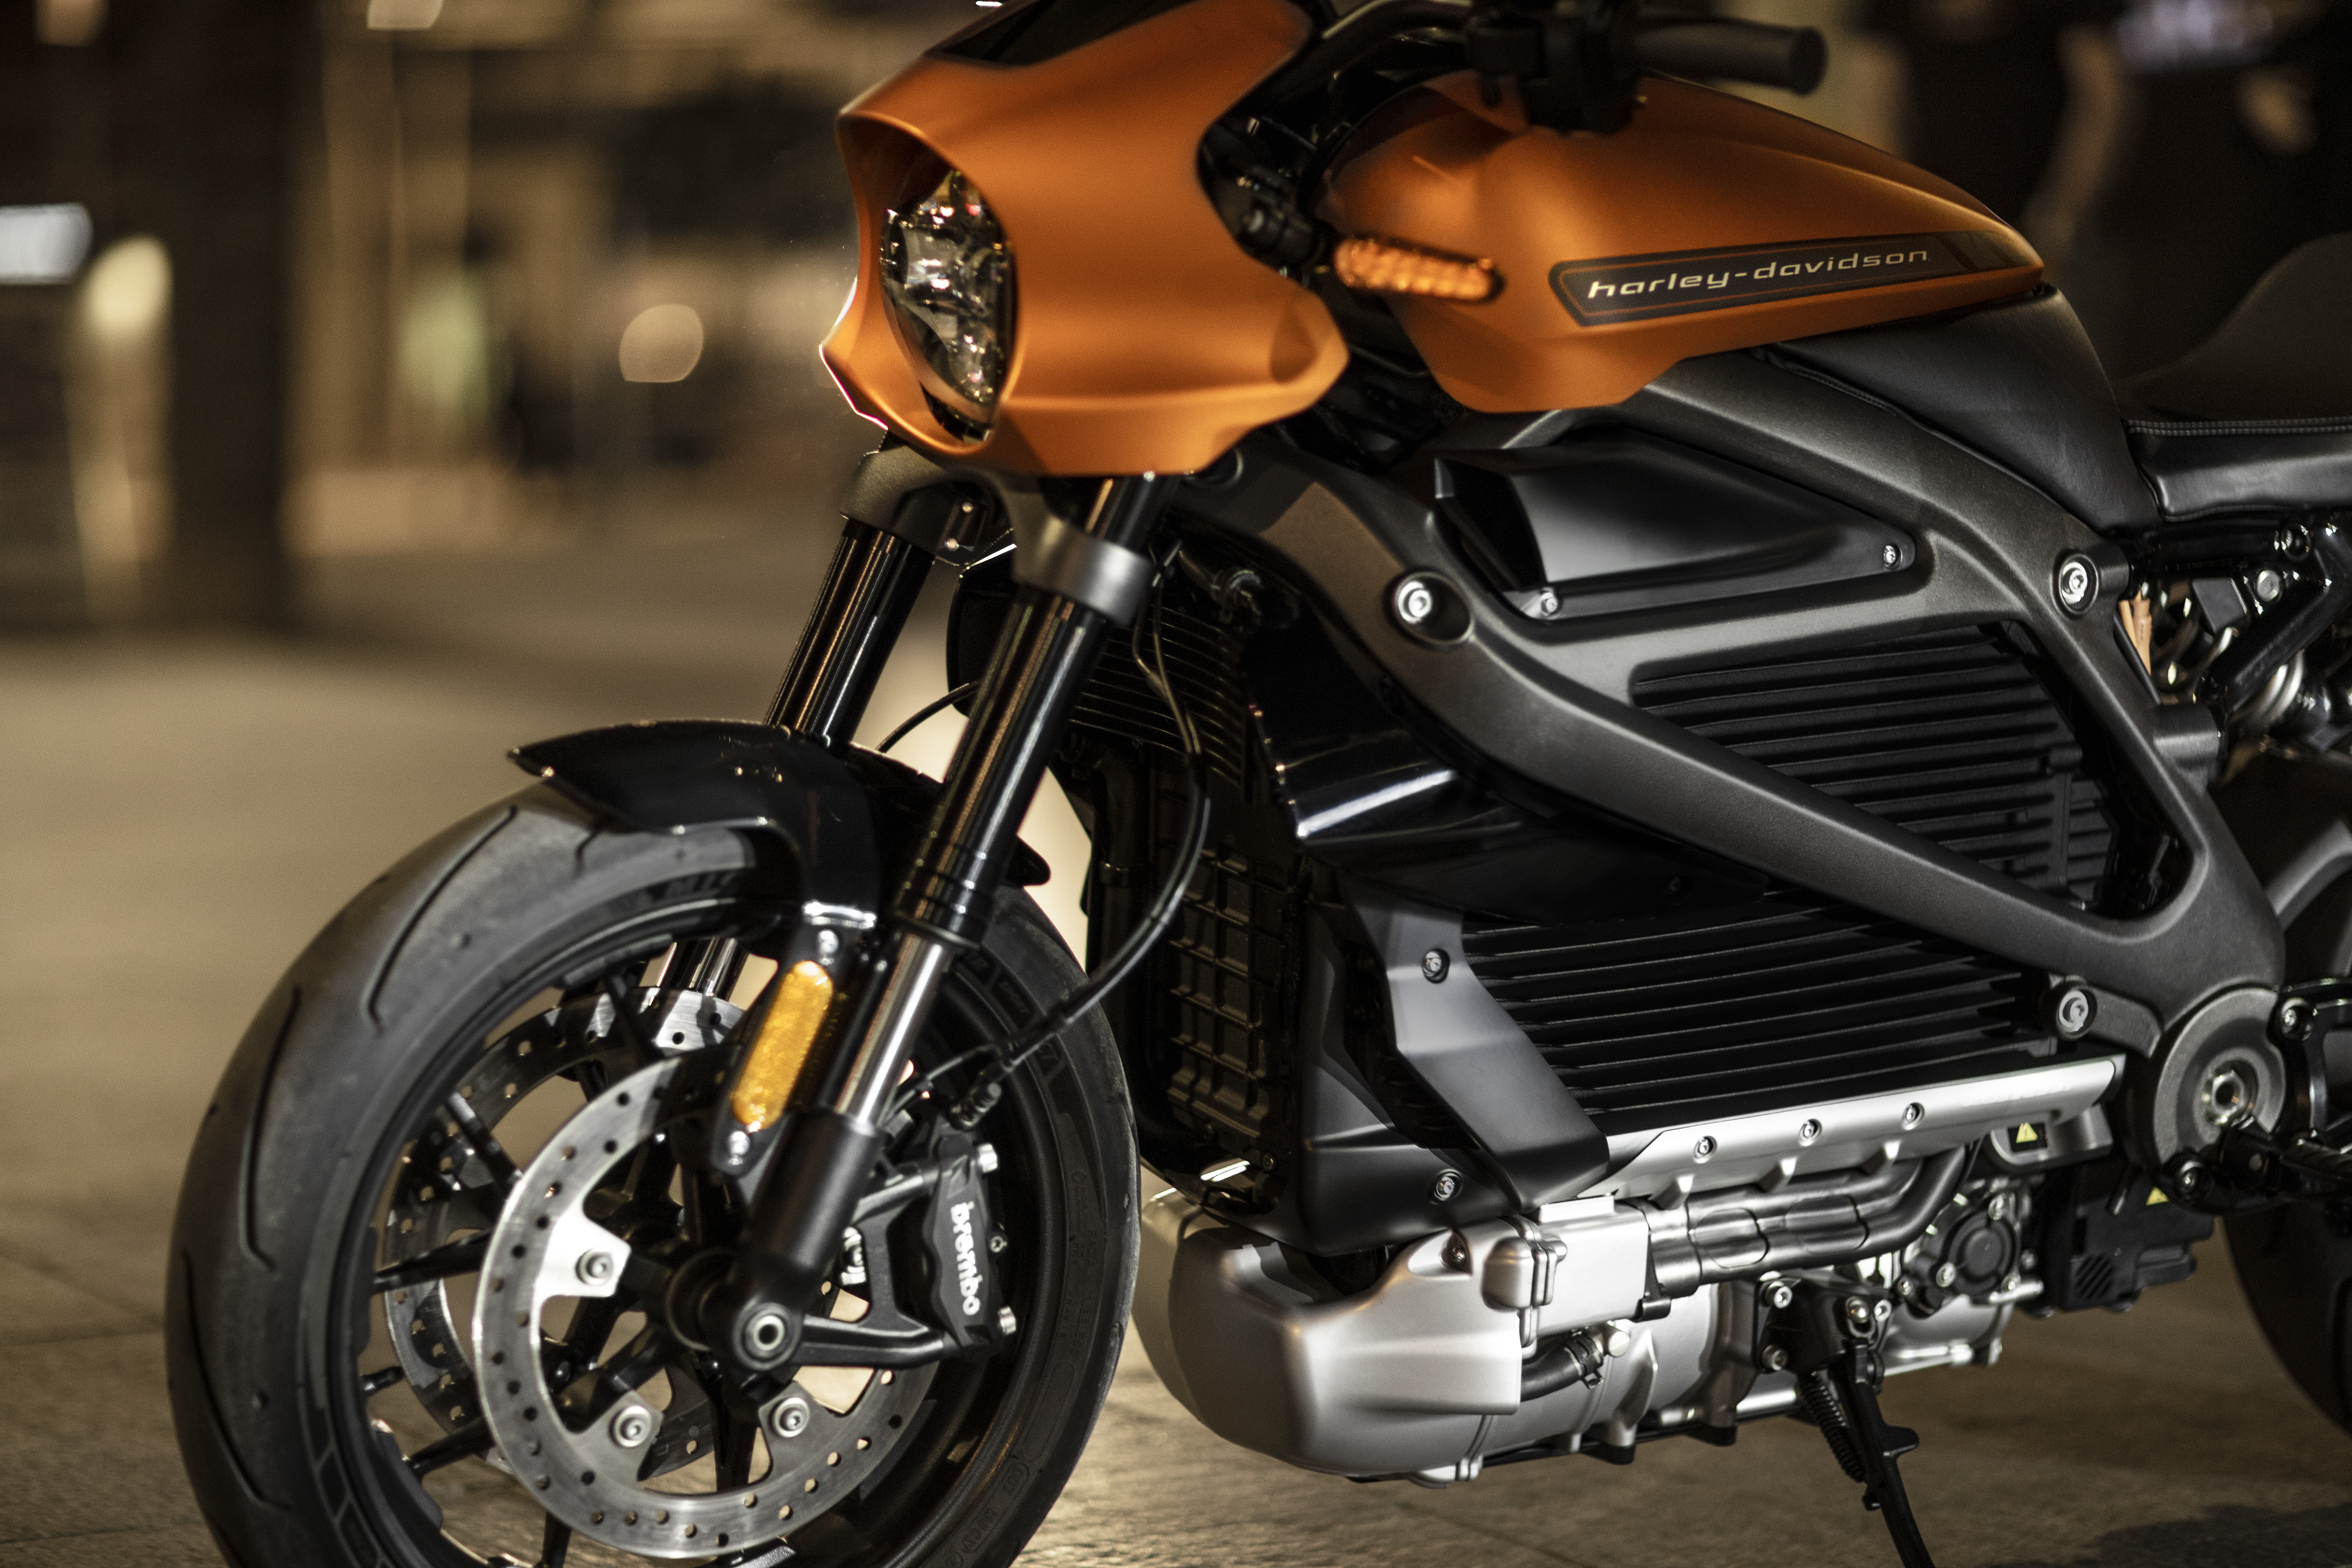 Harley-Davidson debuts its LiveWire electric motorcycle